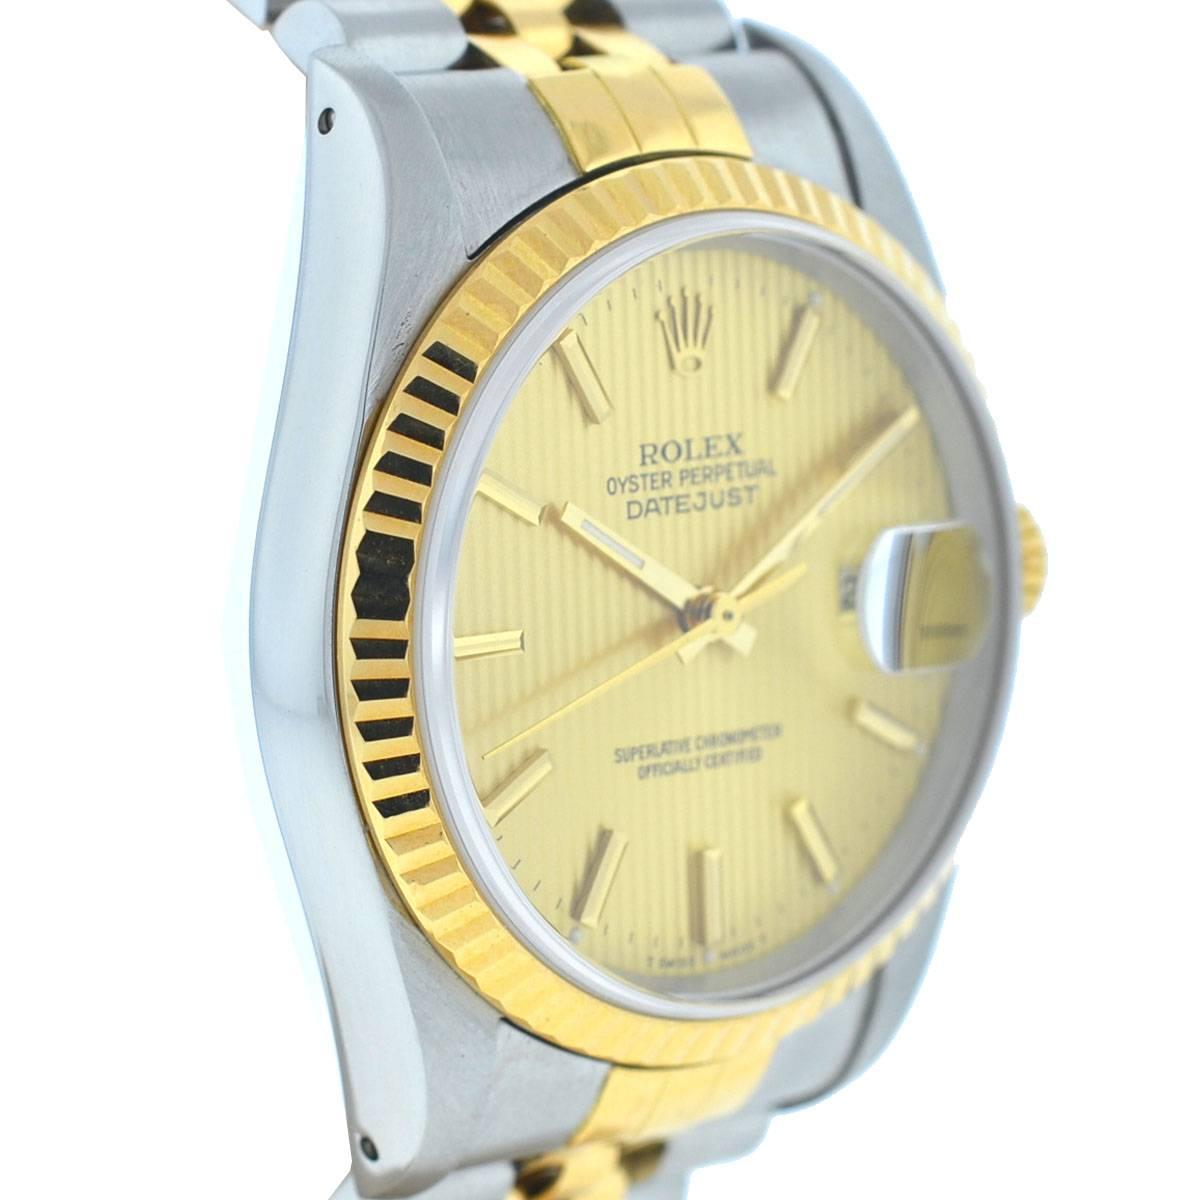 Company - Rolex
Style - Dress/Formal
Model - Datejust
Reference Number - 16233 (